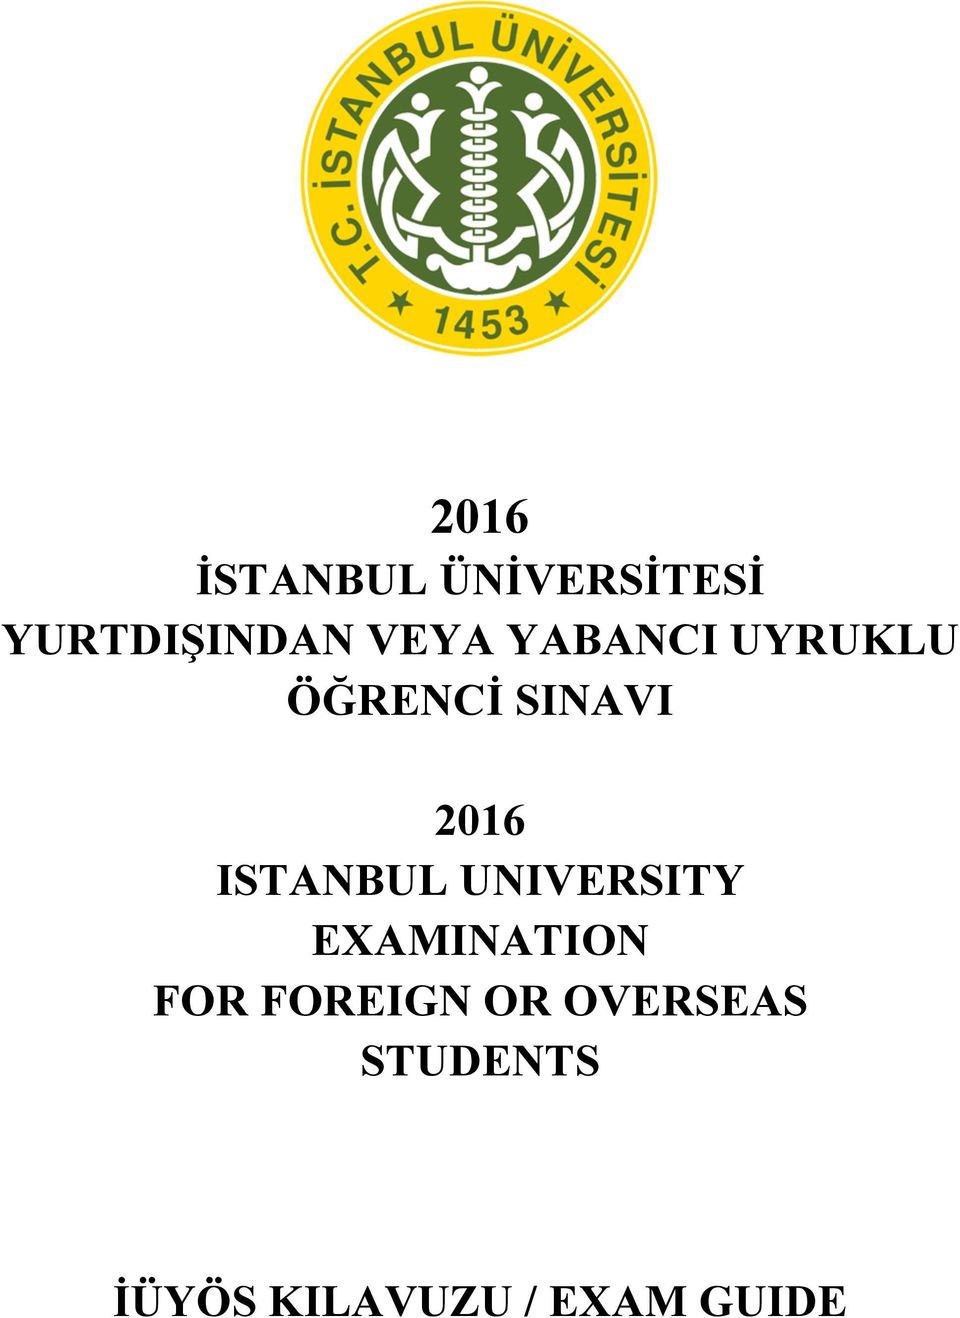 ISTANBUL UNIVERSITY EXAMINATION FOR FOREIGN